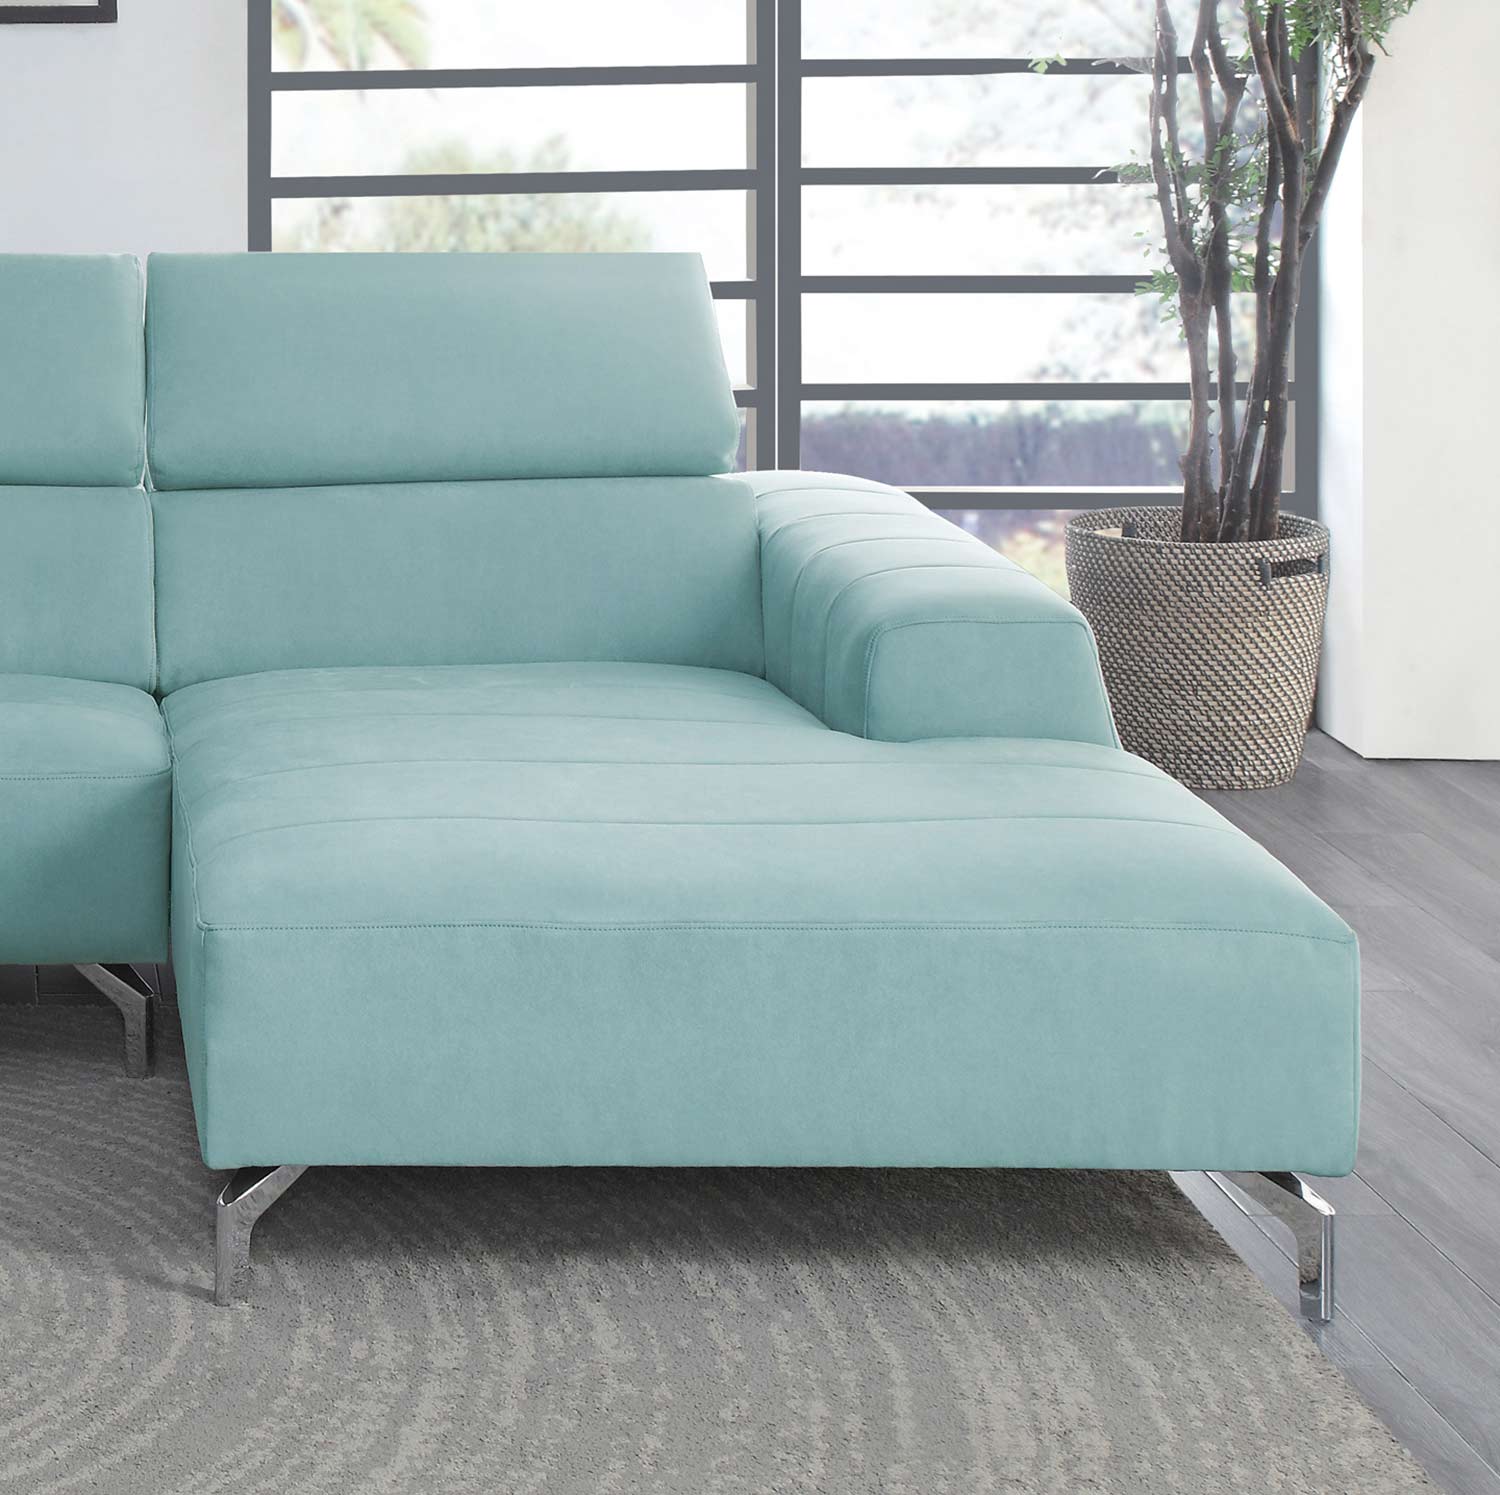 Homelegance Prose Right Side Chaise - Teal